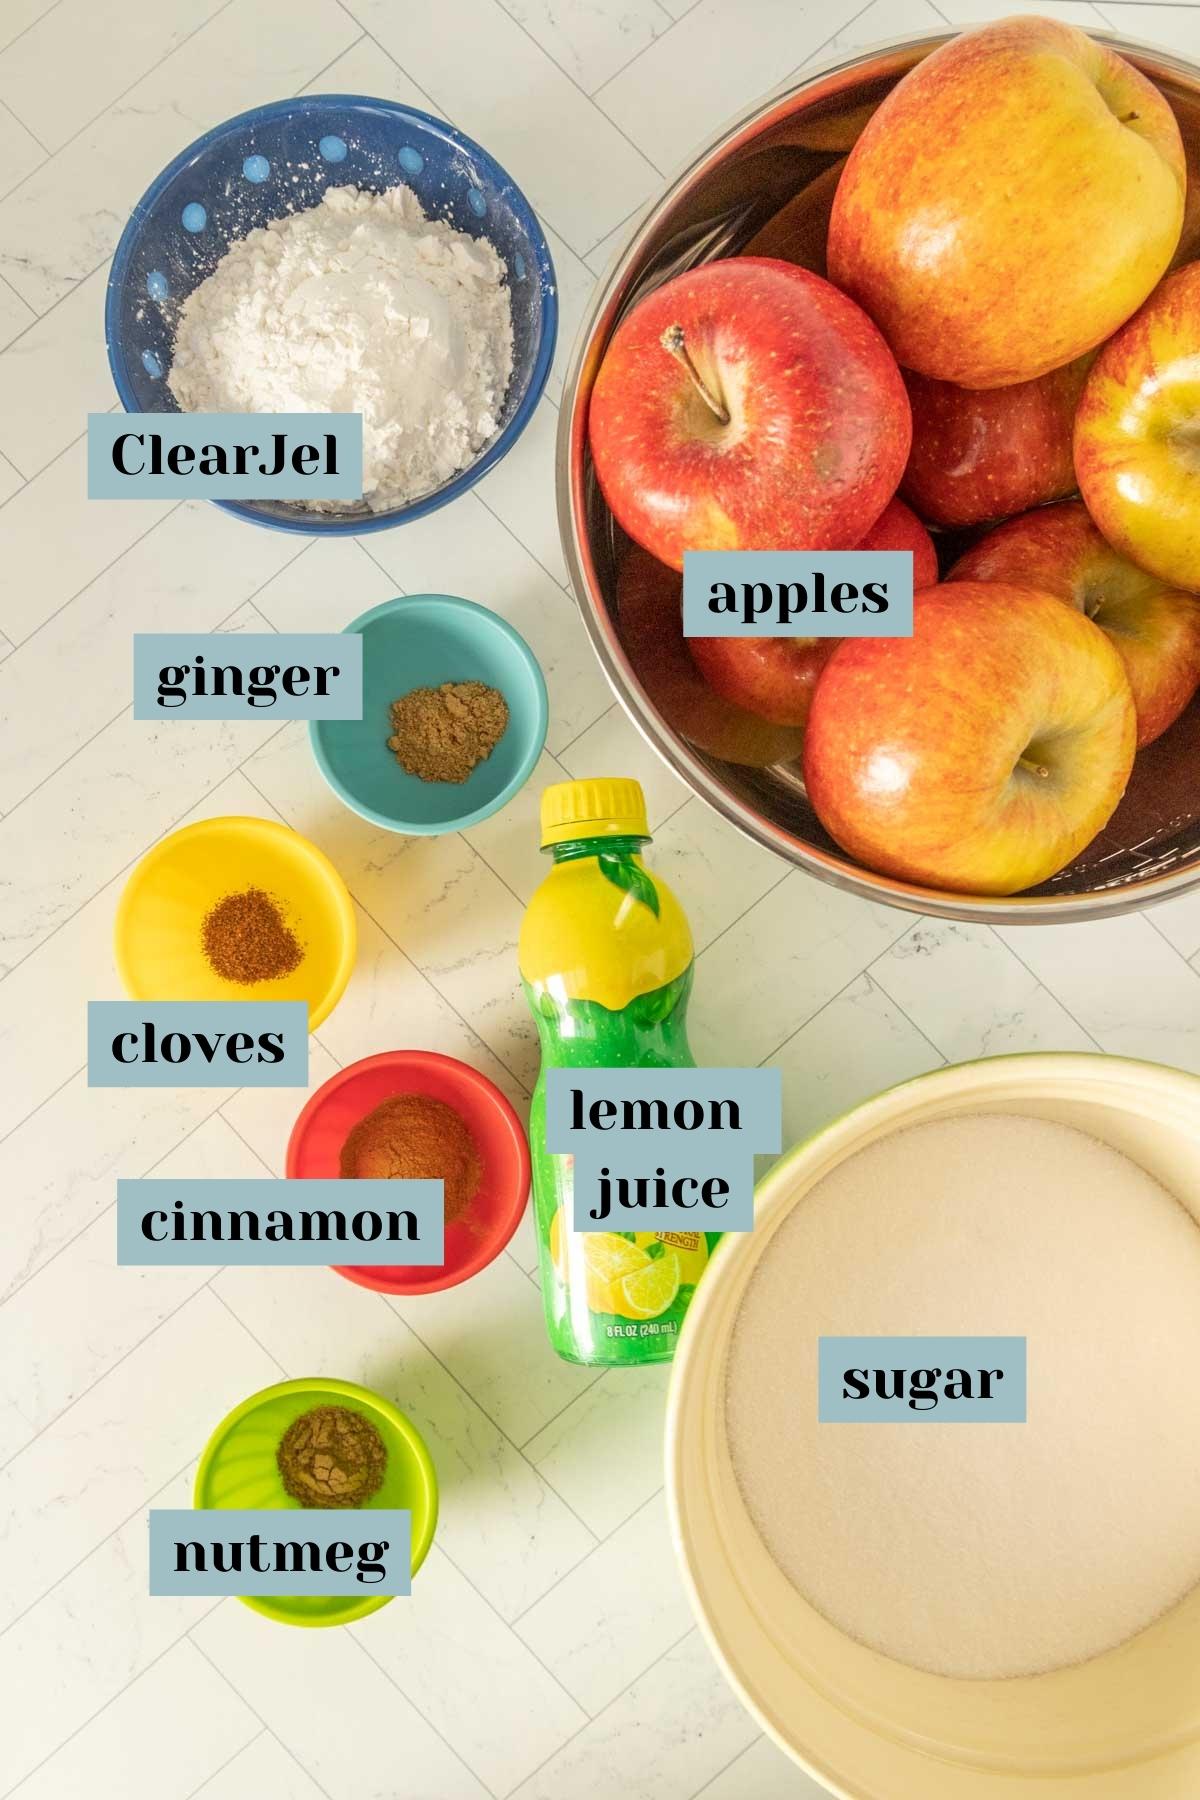 The ingredients for apple pie filling are laid out on a table.